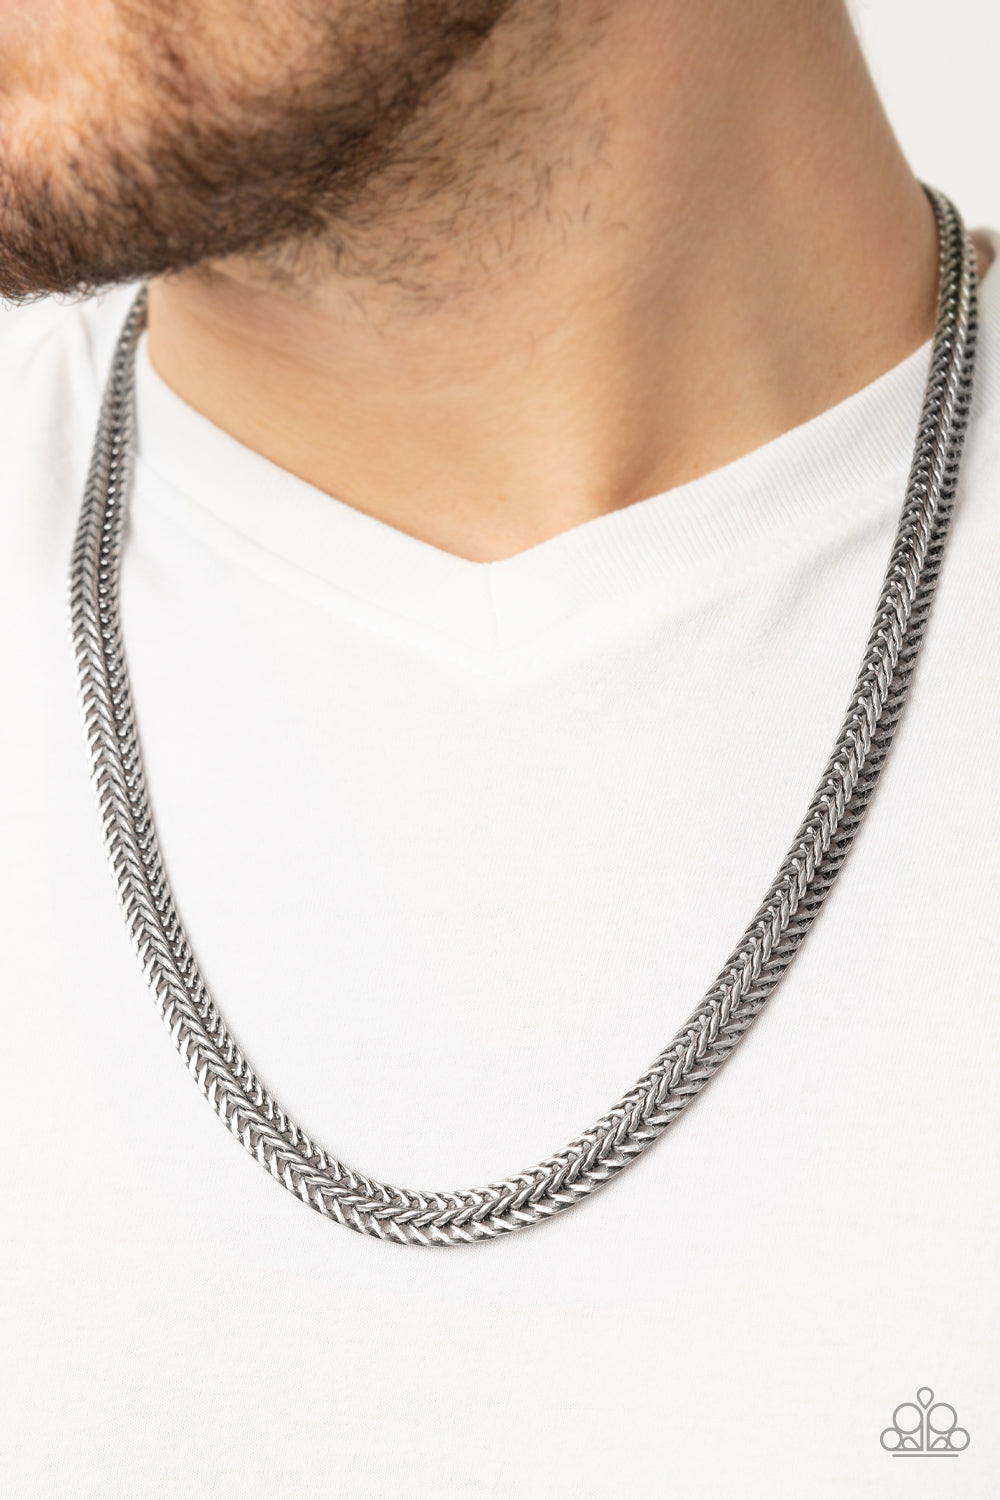 Bee Jewelry Necklace Silver – Paparazzi Chain and Bling - Sugar Motorhead Urban Accessories - Modern